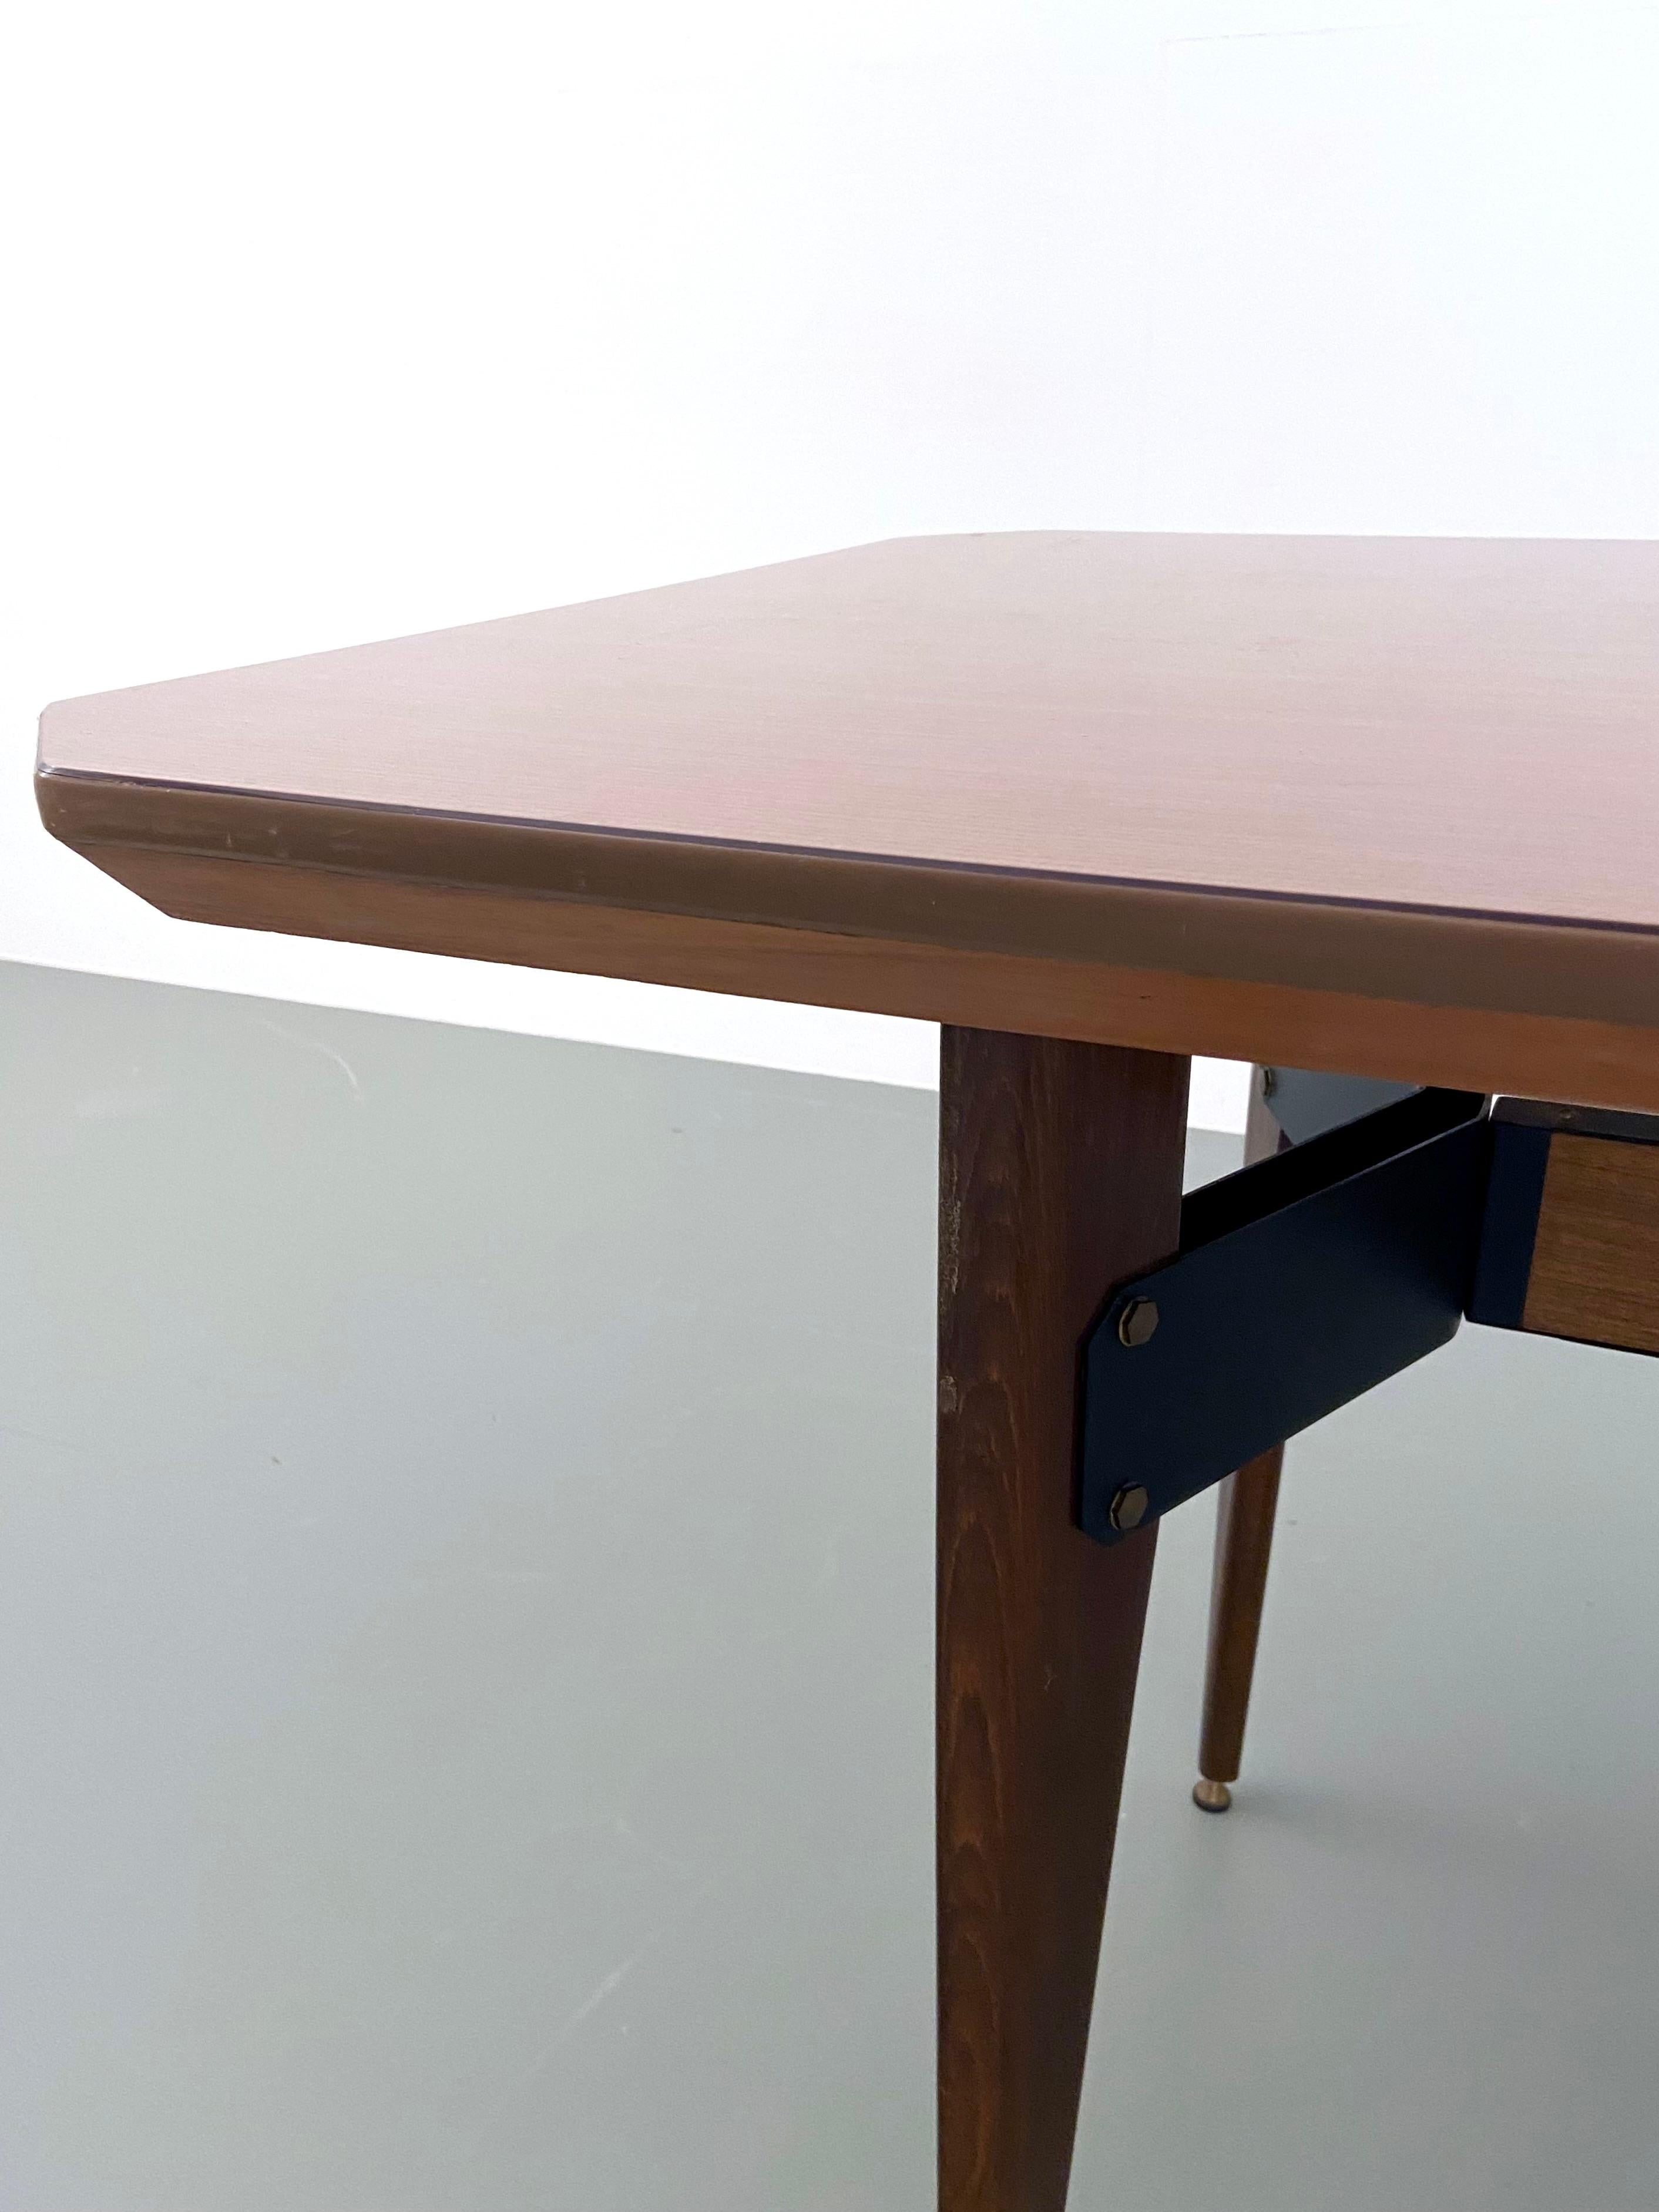 Mid-20th Century Carlo Ratti Dining Table in Wood and Metal, Italy, 1960's For Sale